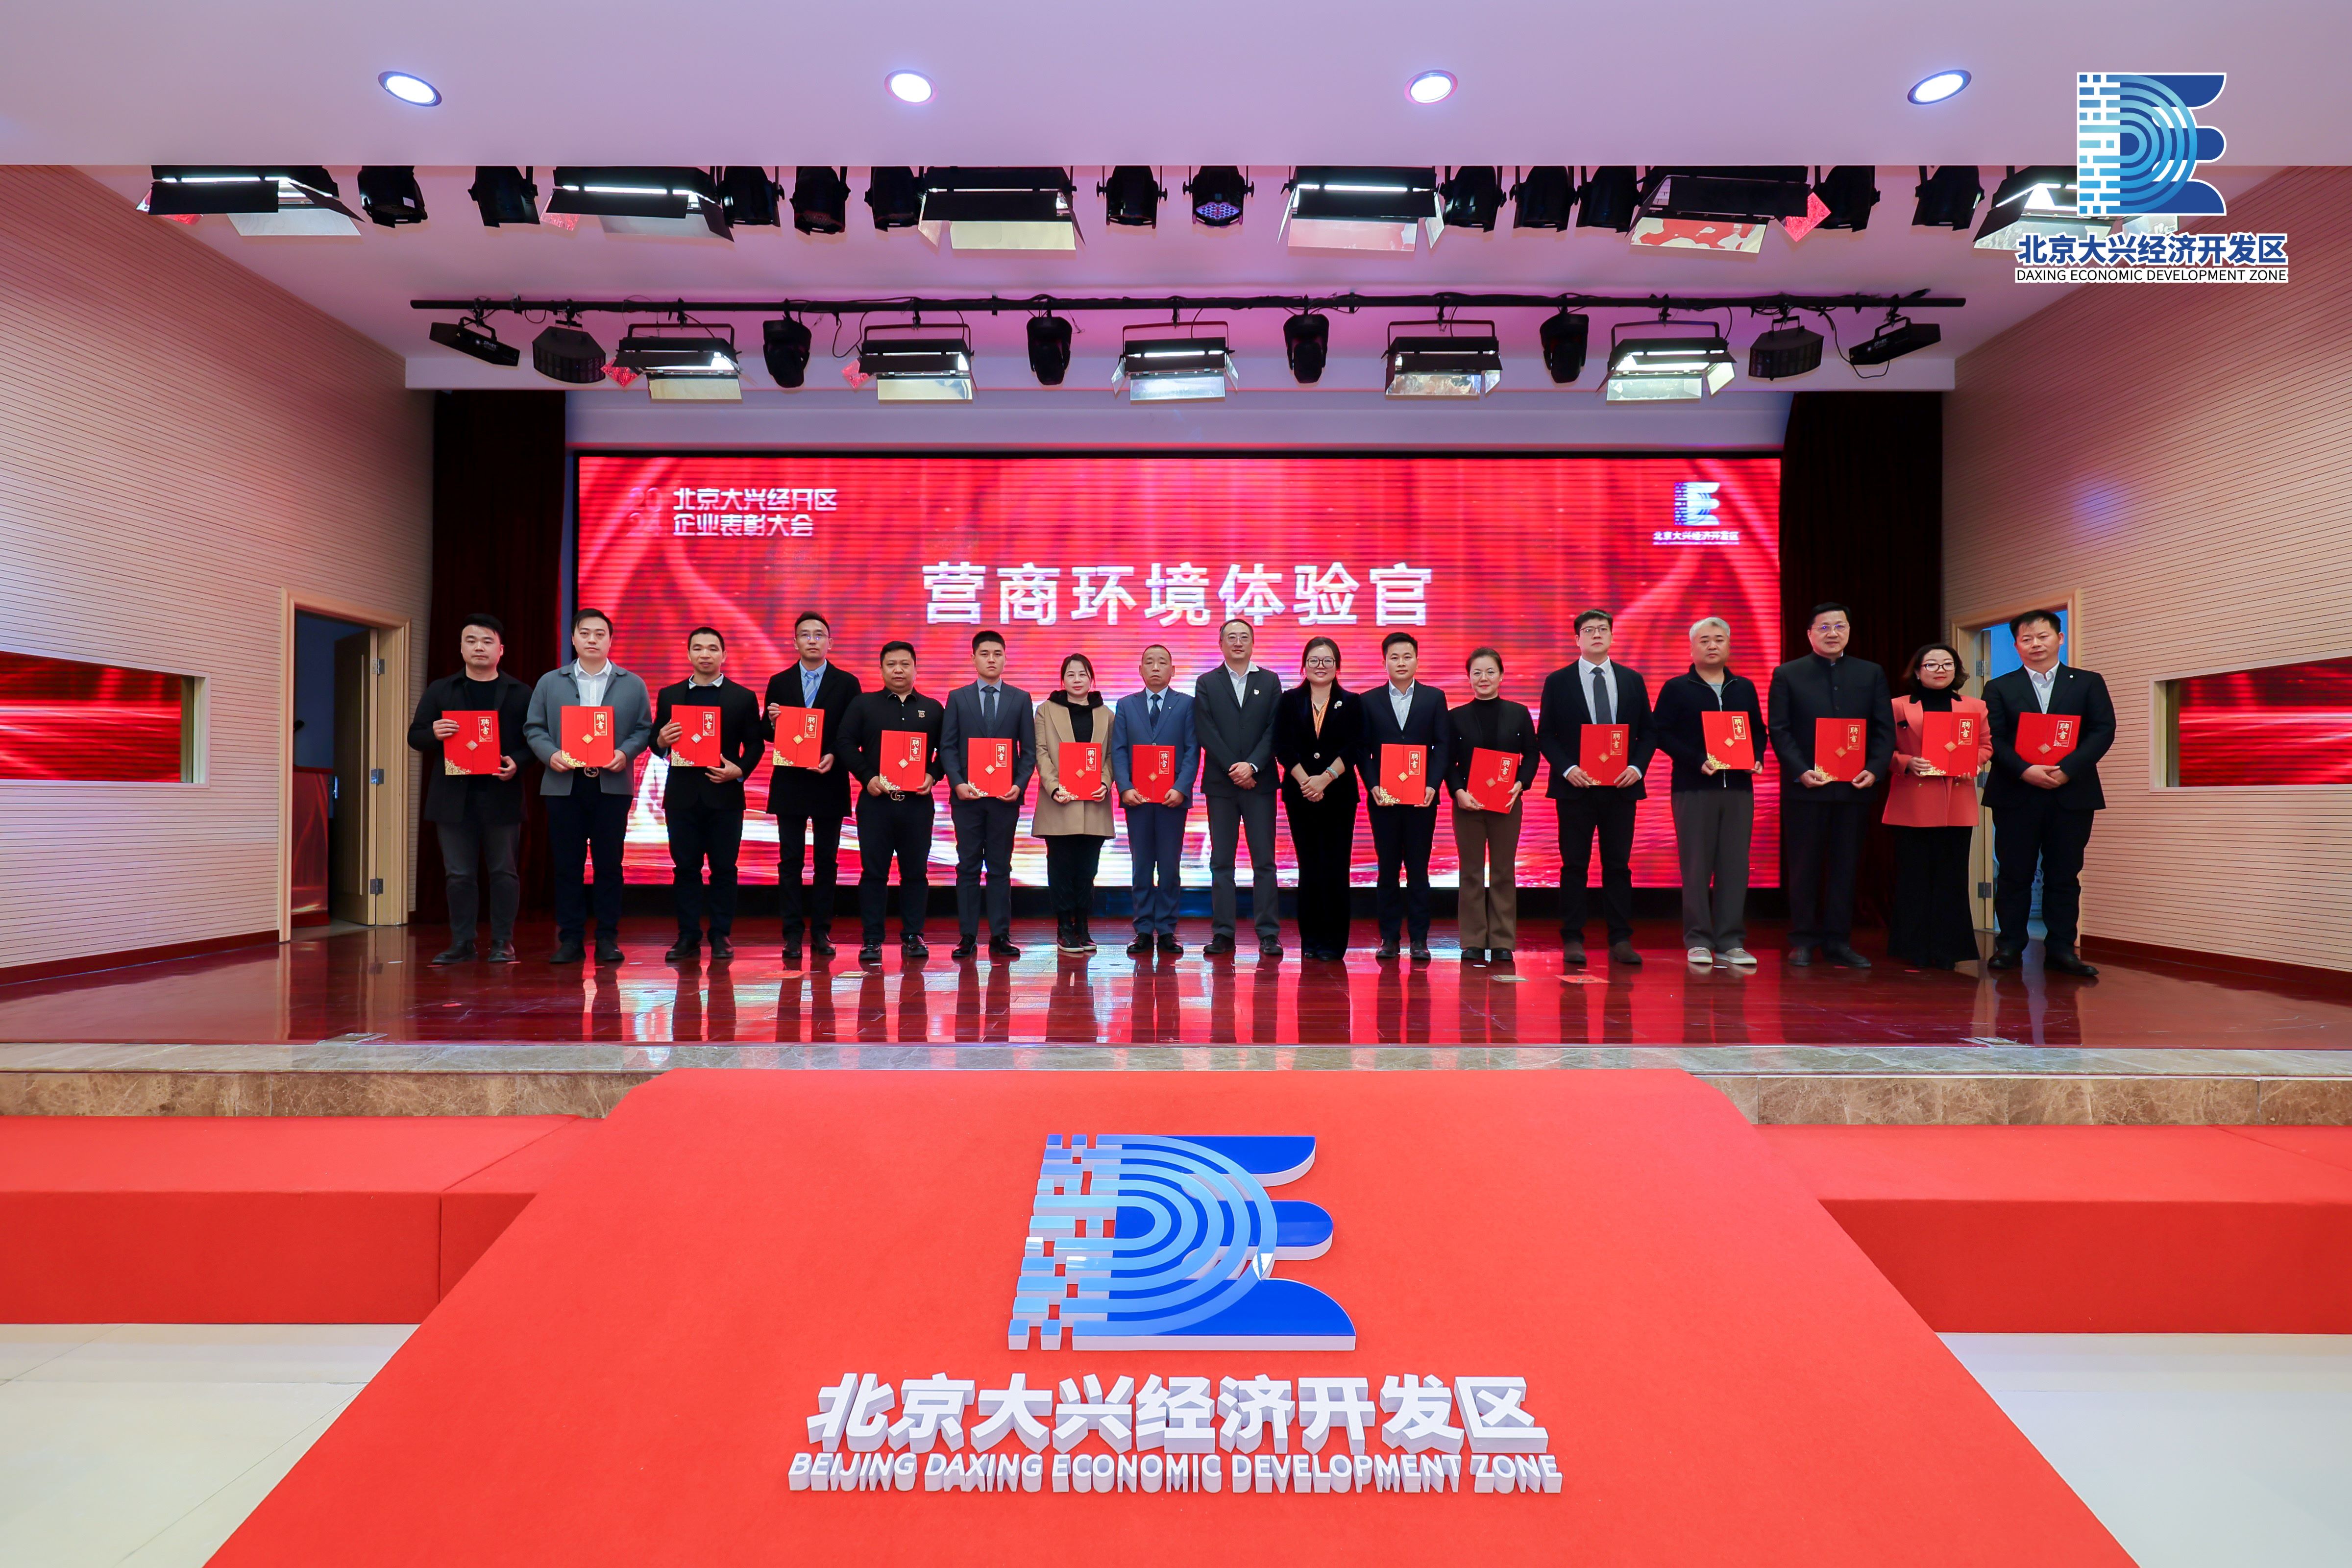 WPL Collaborates with the Daxing Economic Development Zone, Jointly Undertaking New Missions for the Development of the Park